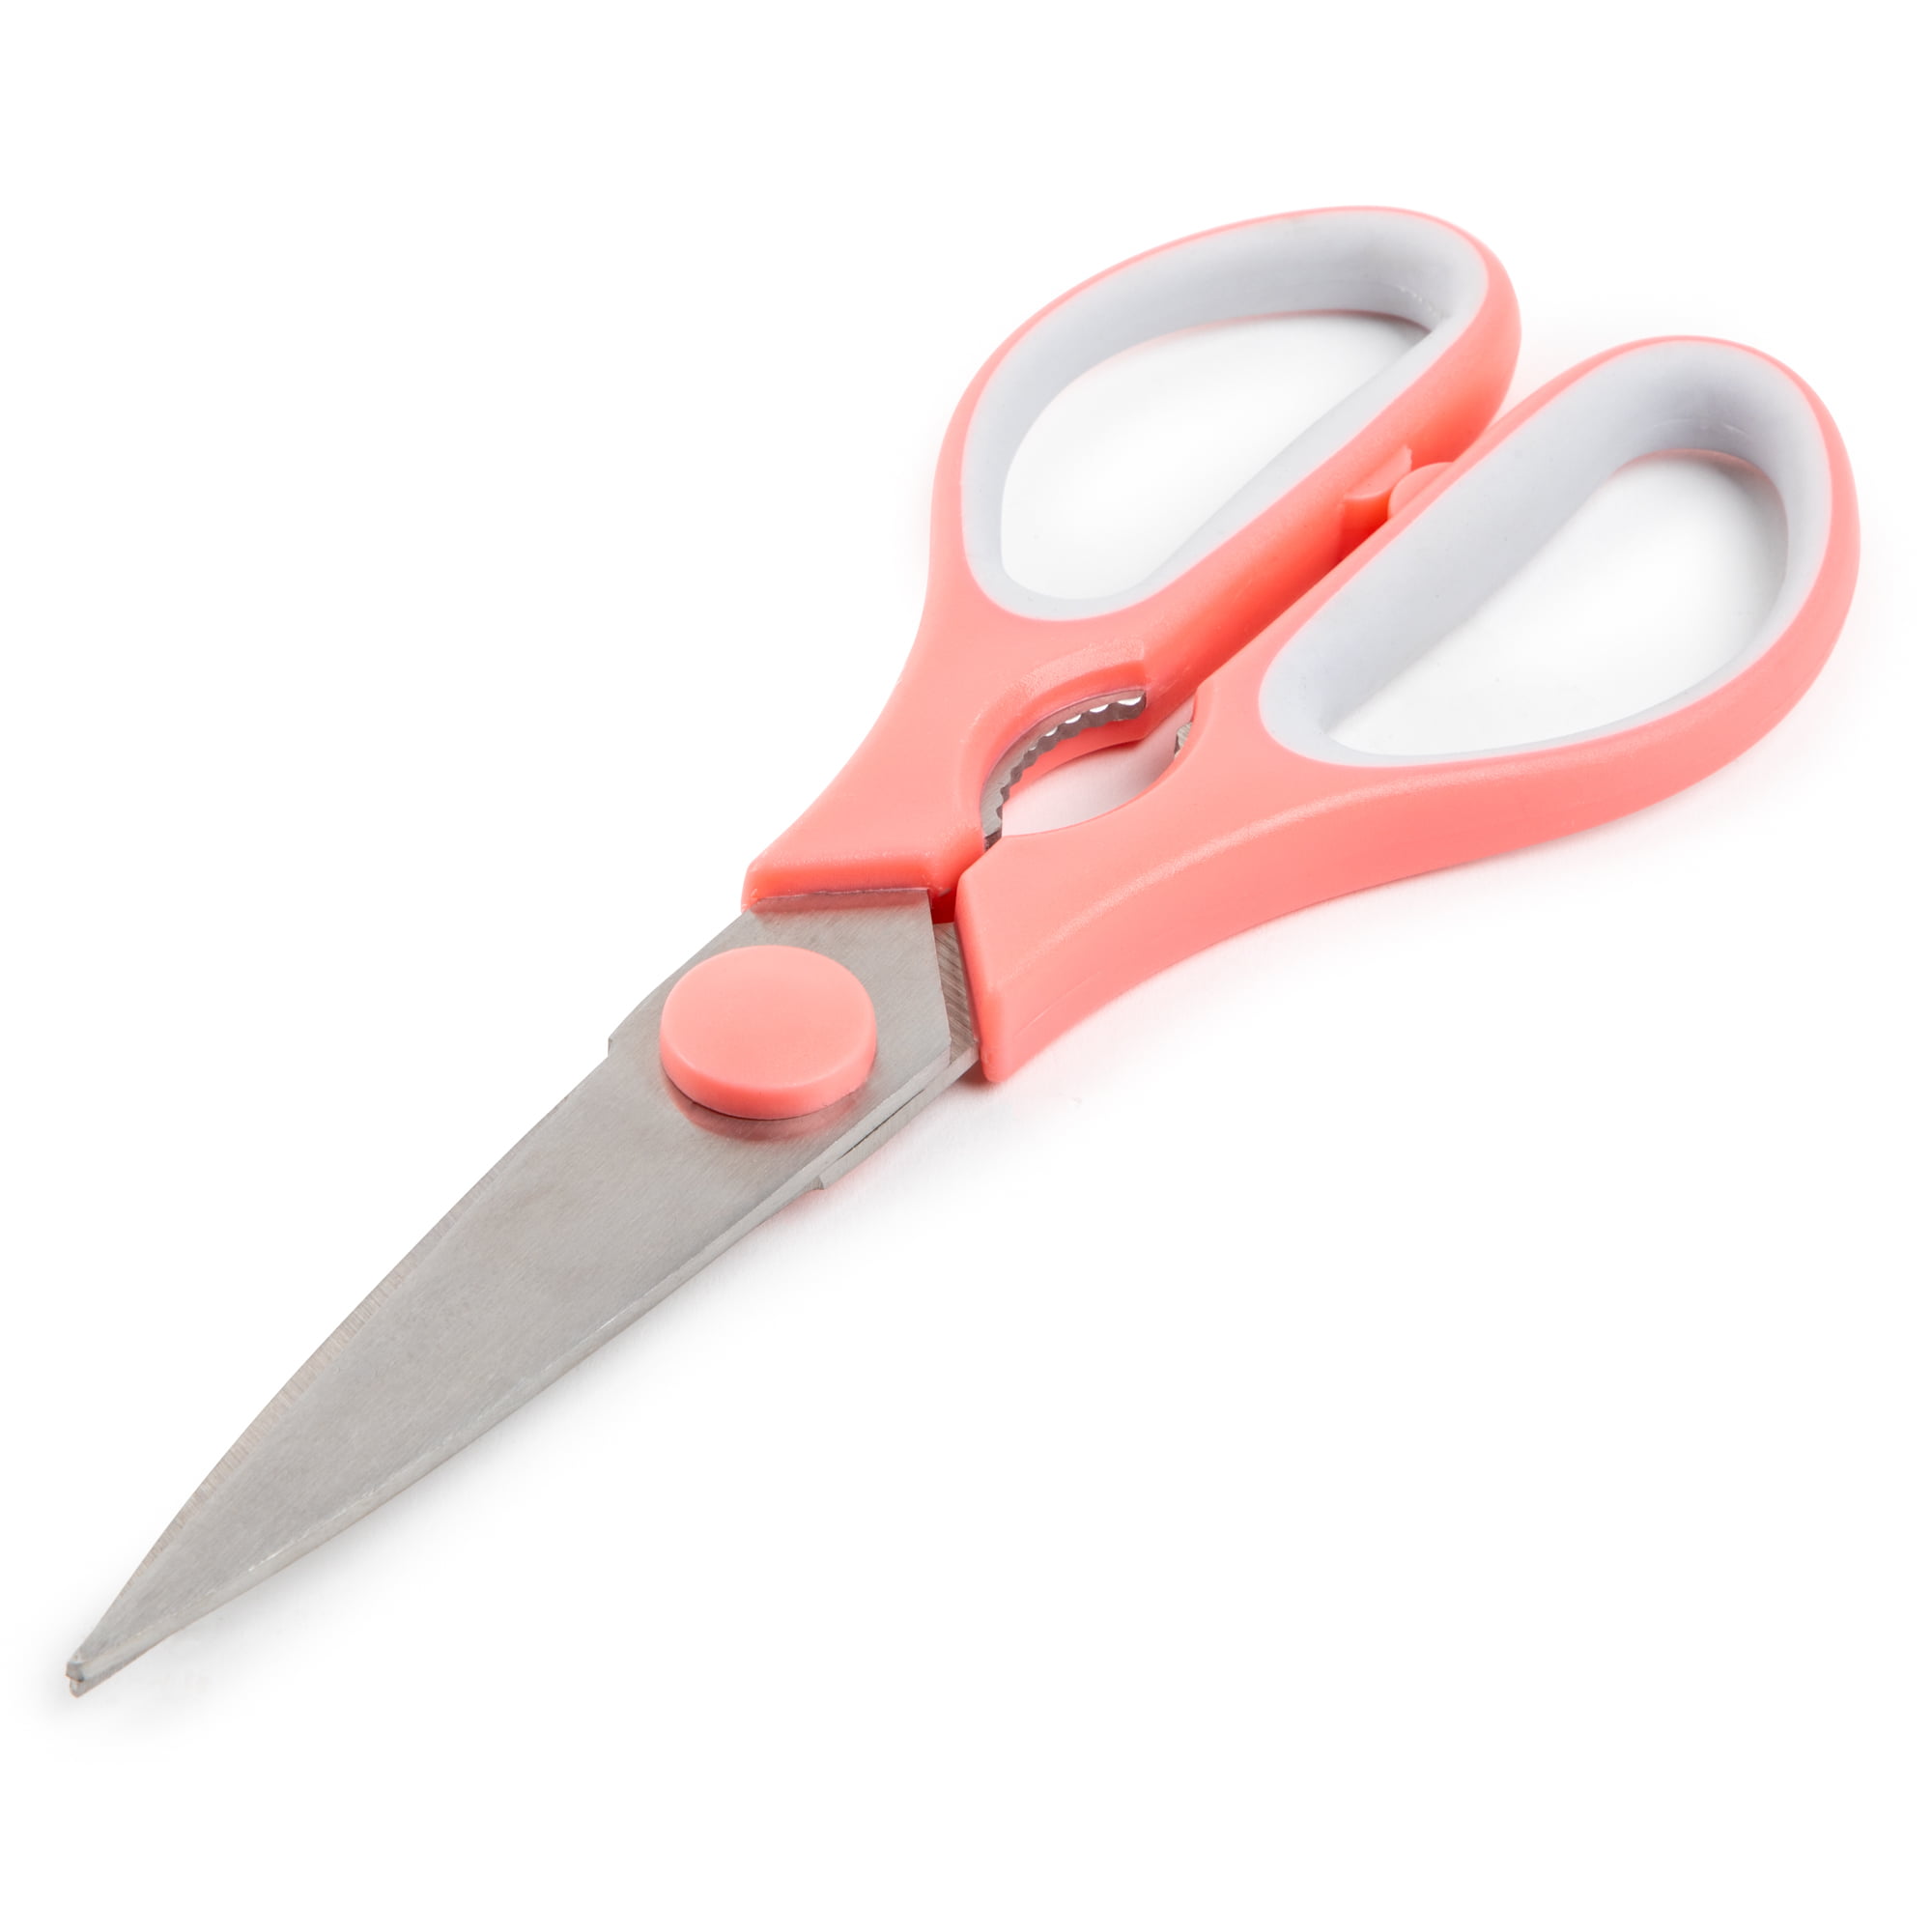 TONIFE TS11 Kitchen Shears Made With Food-Grade Stainless Steel